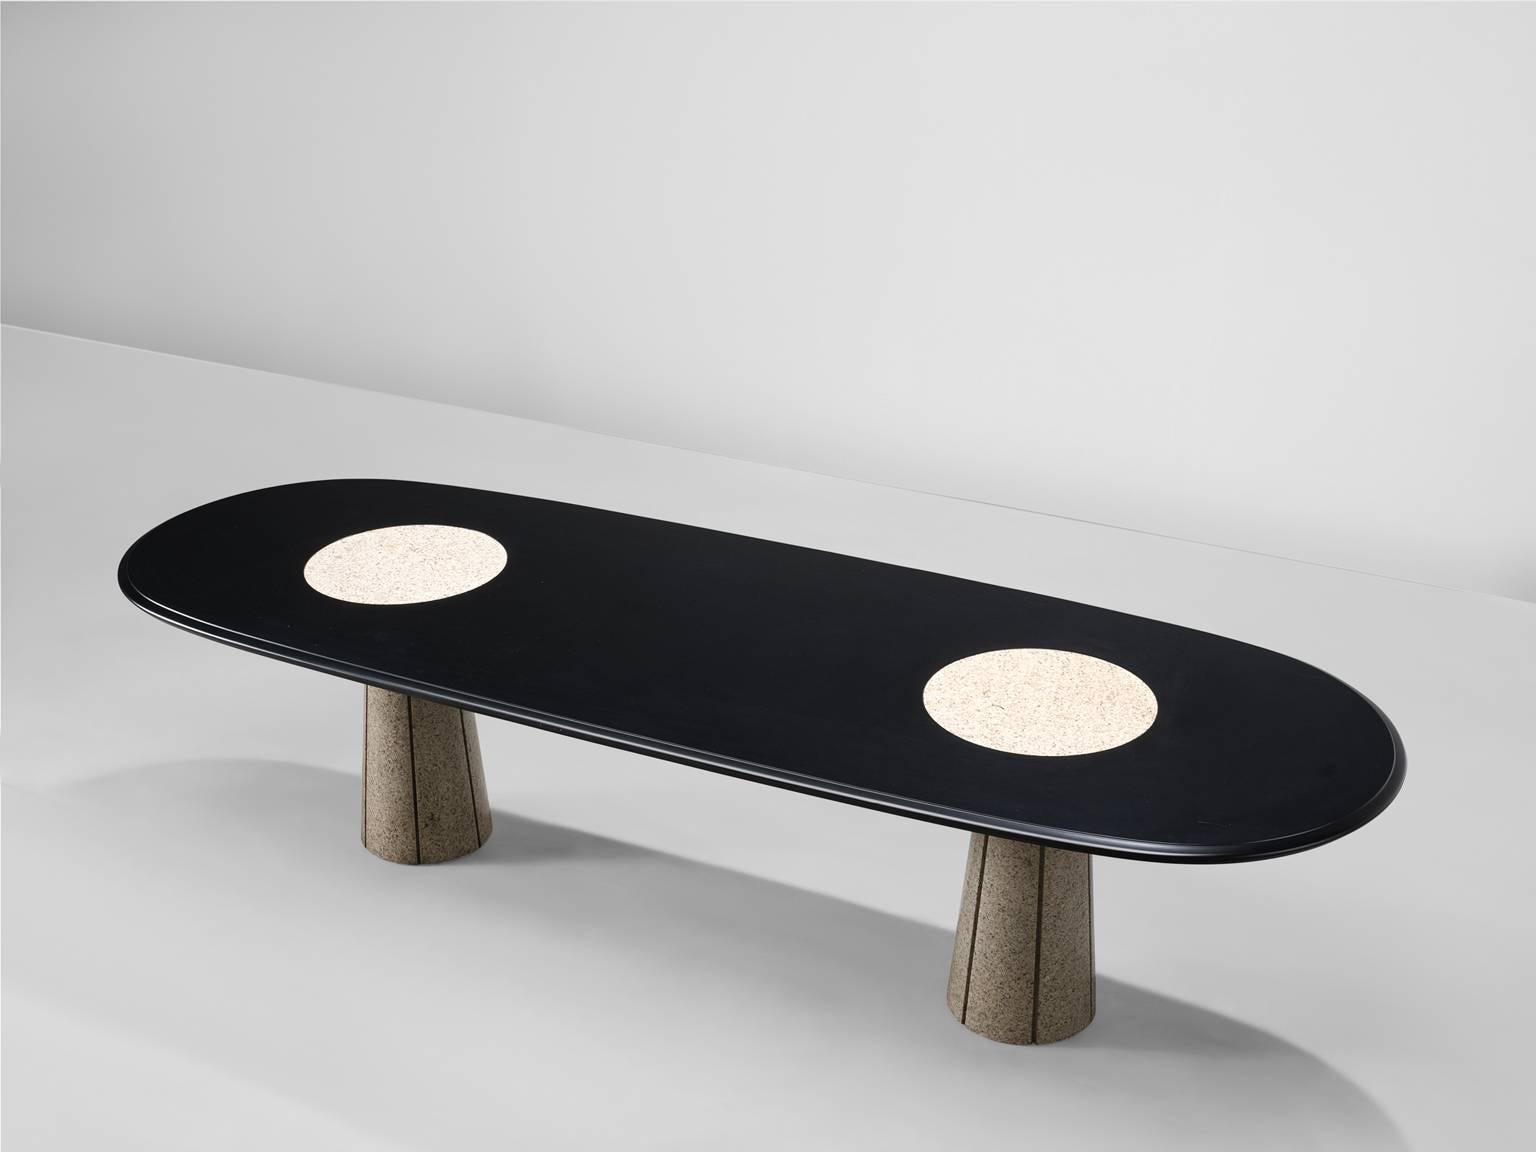 Conference table, marble, metal and plywood, attributed to Saporiti, Italy, 1970s. 

This oval marble and wooden table is exemplary for the postmodern design of the postwar Italian era. It is playful, linked to former styles and architectural. The